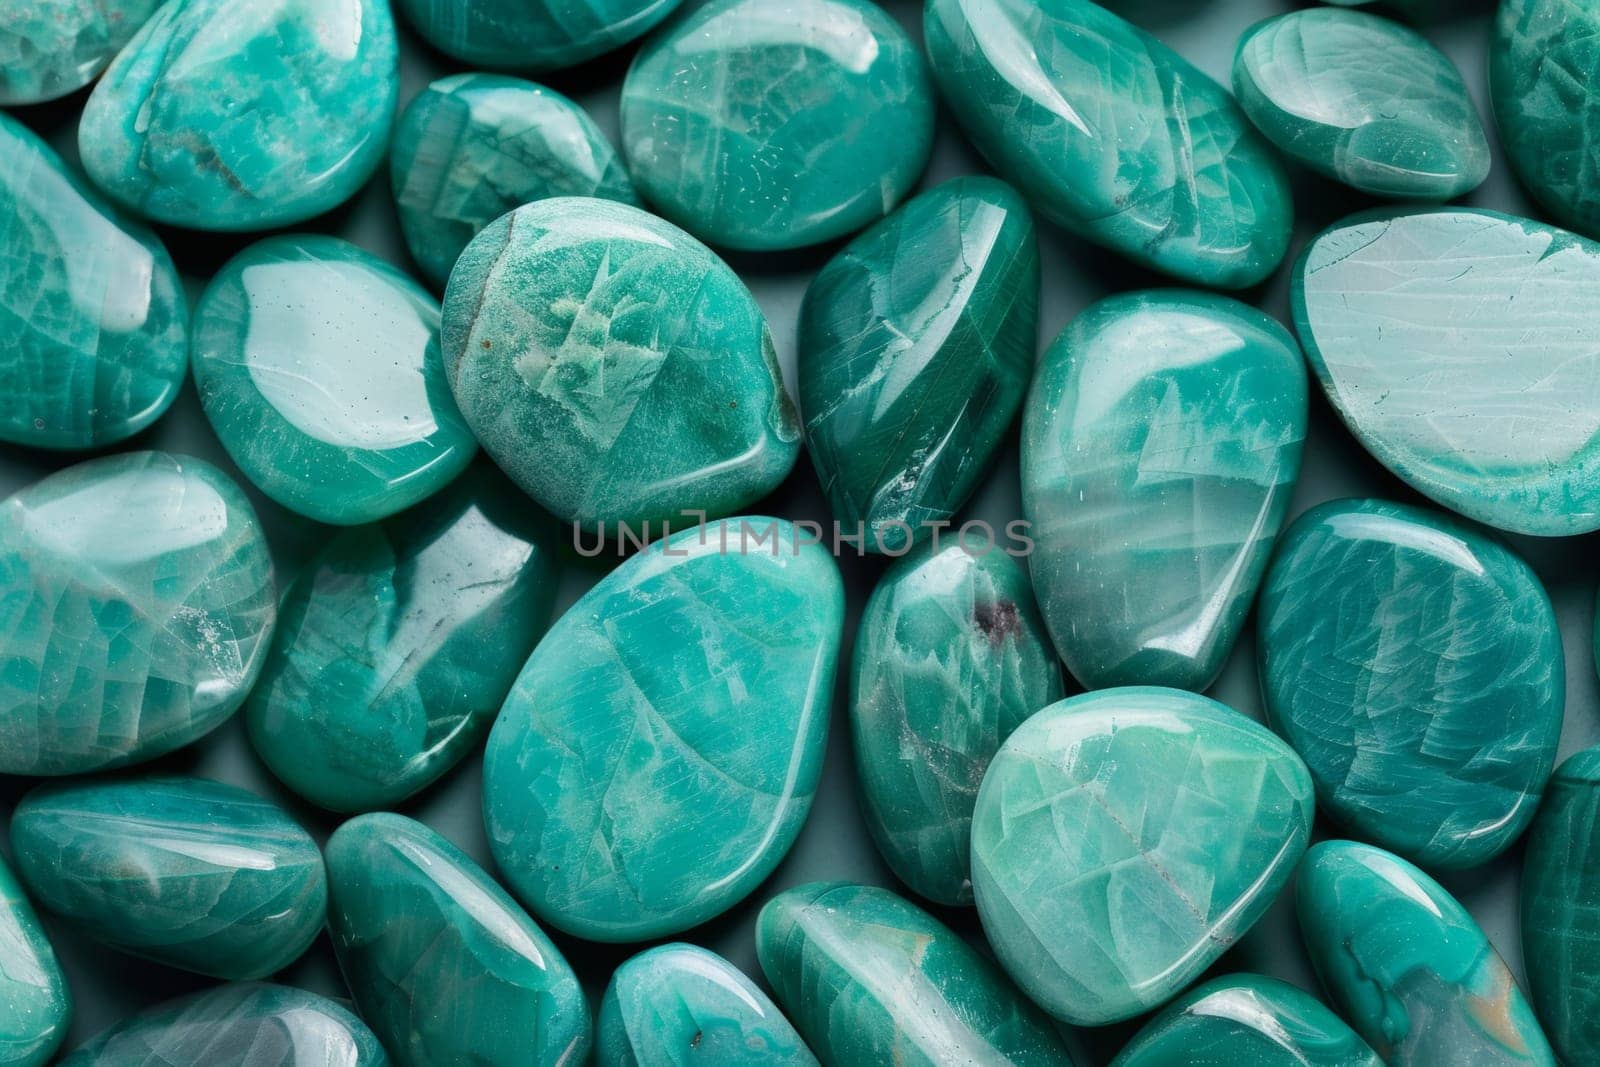 Background with turquoise emerald-colored stones by papatonic